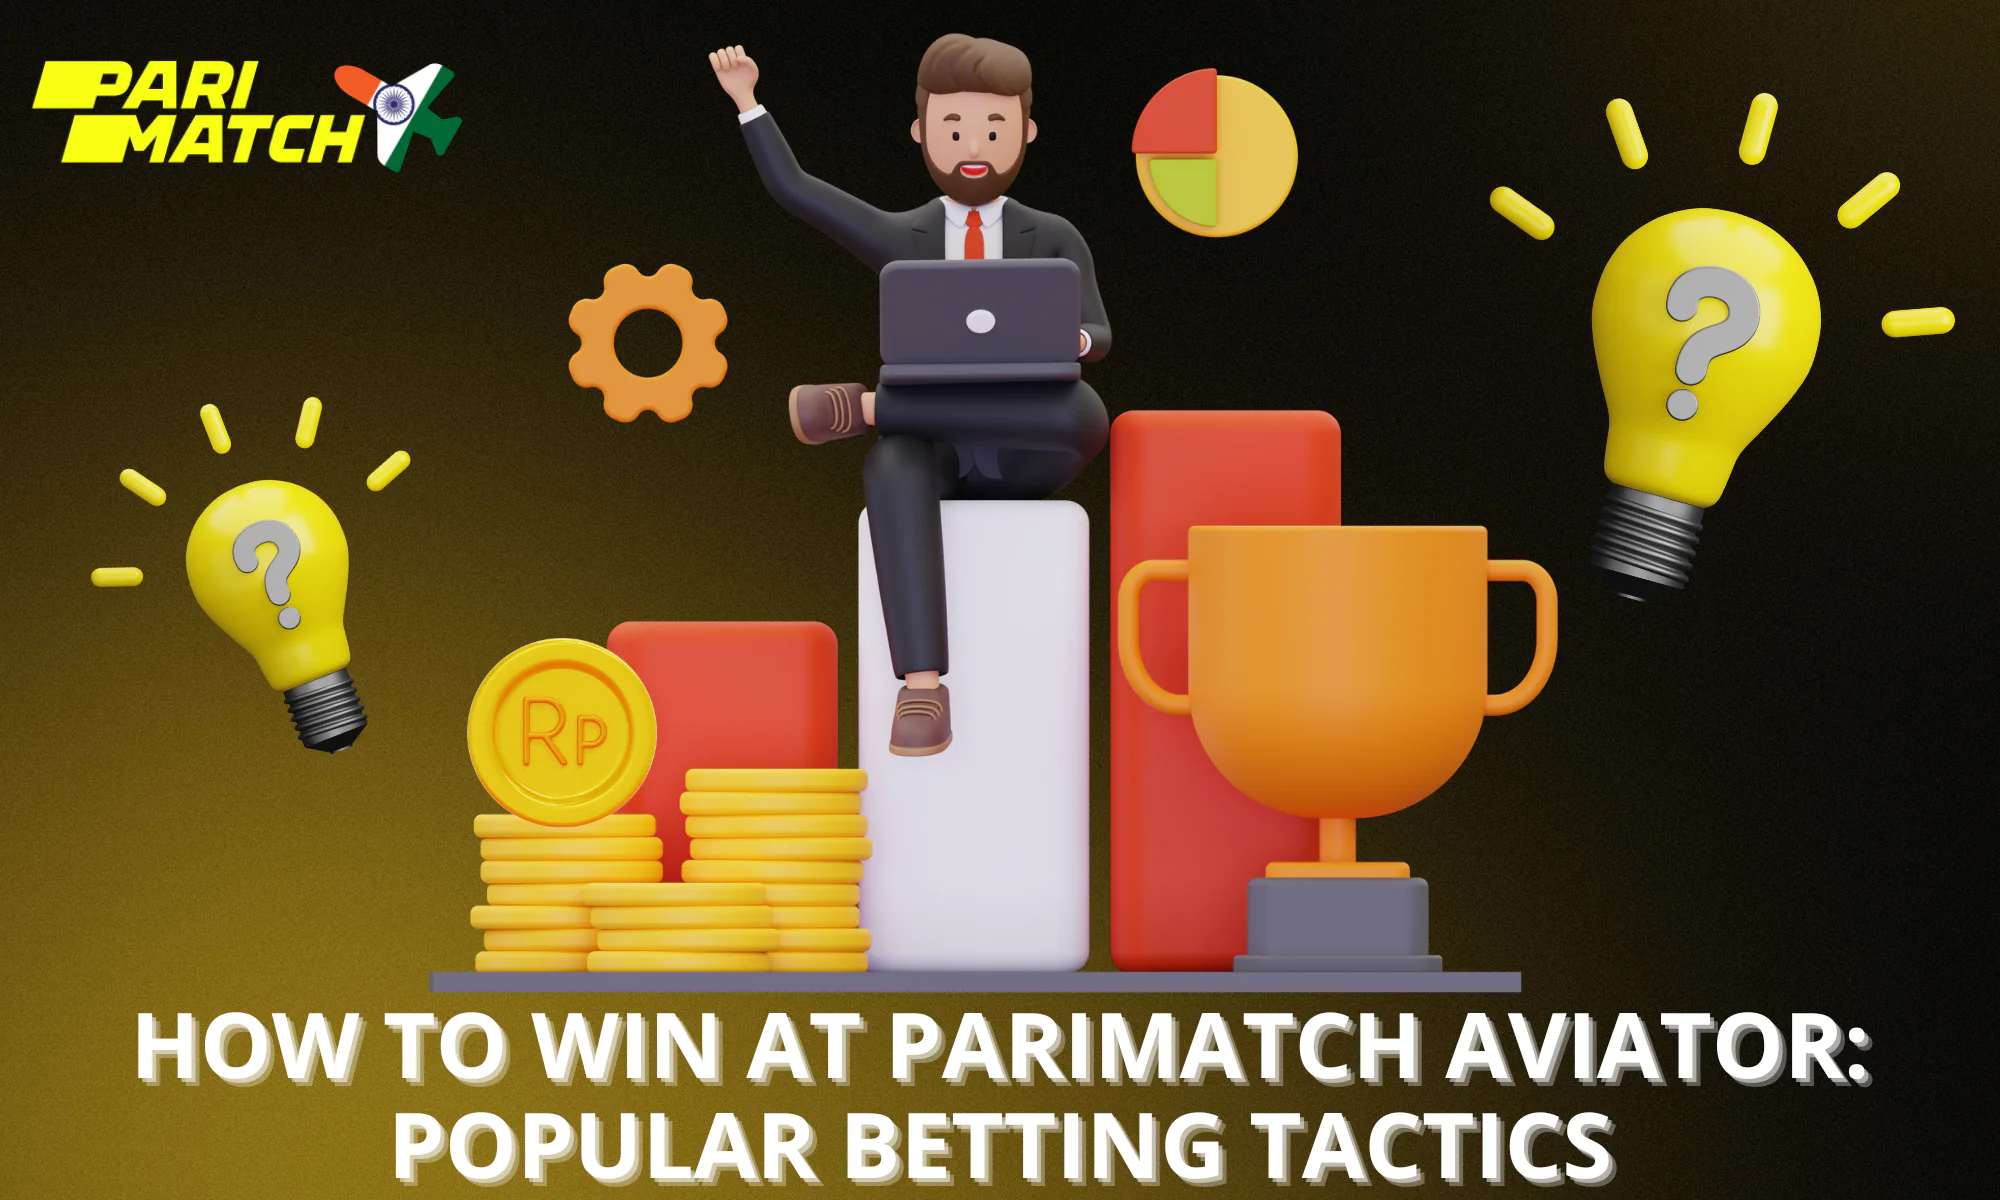 Step by step how you can easily win in Parimatch Aviator